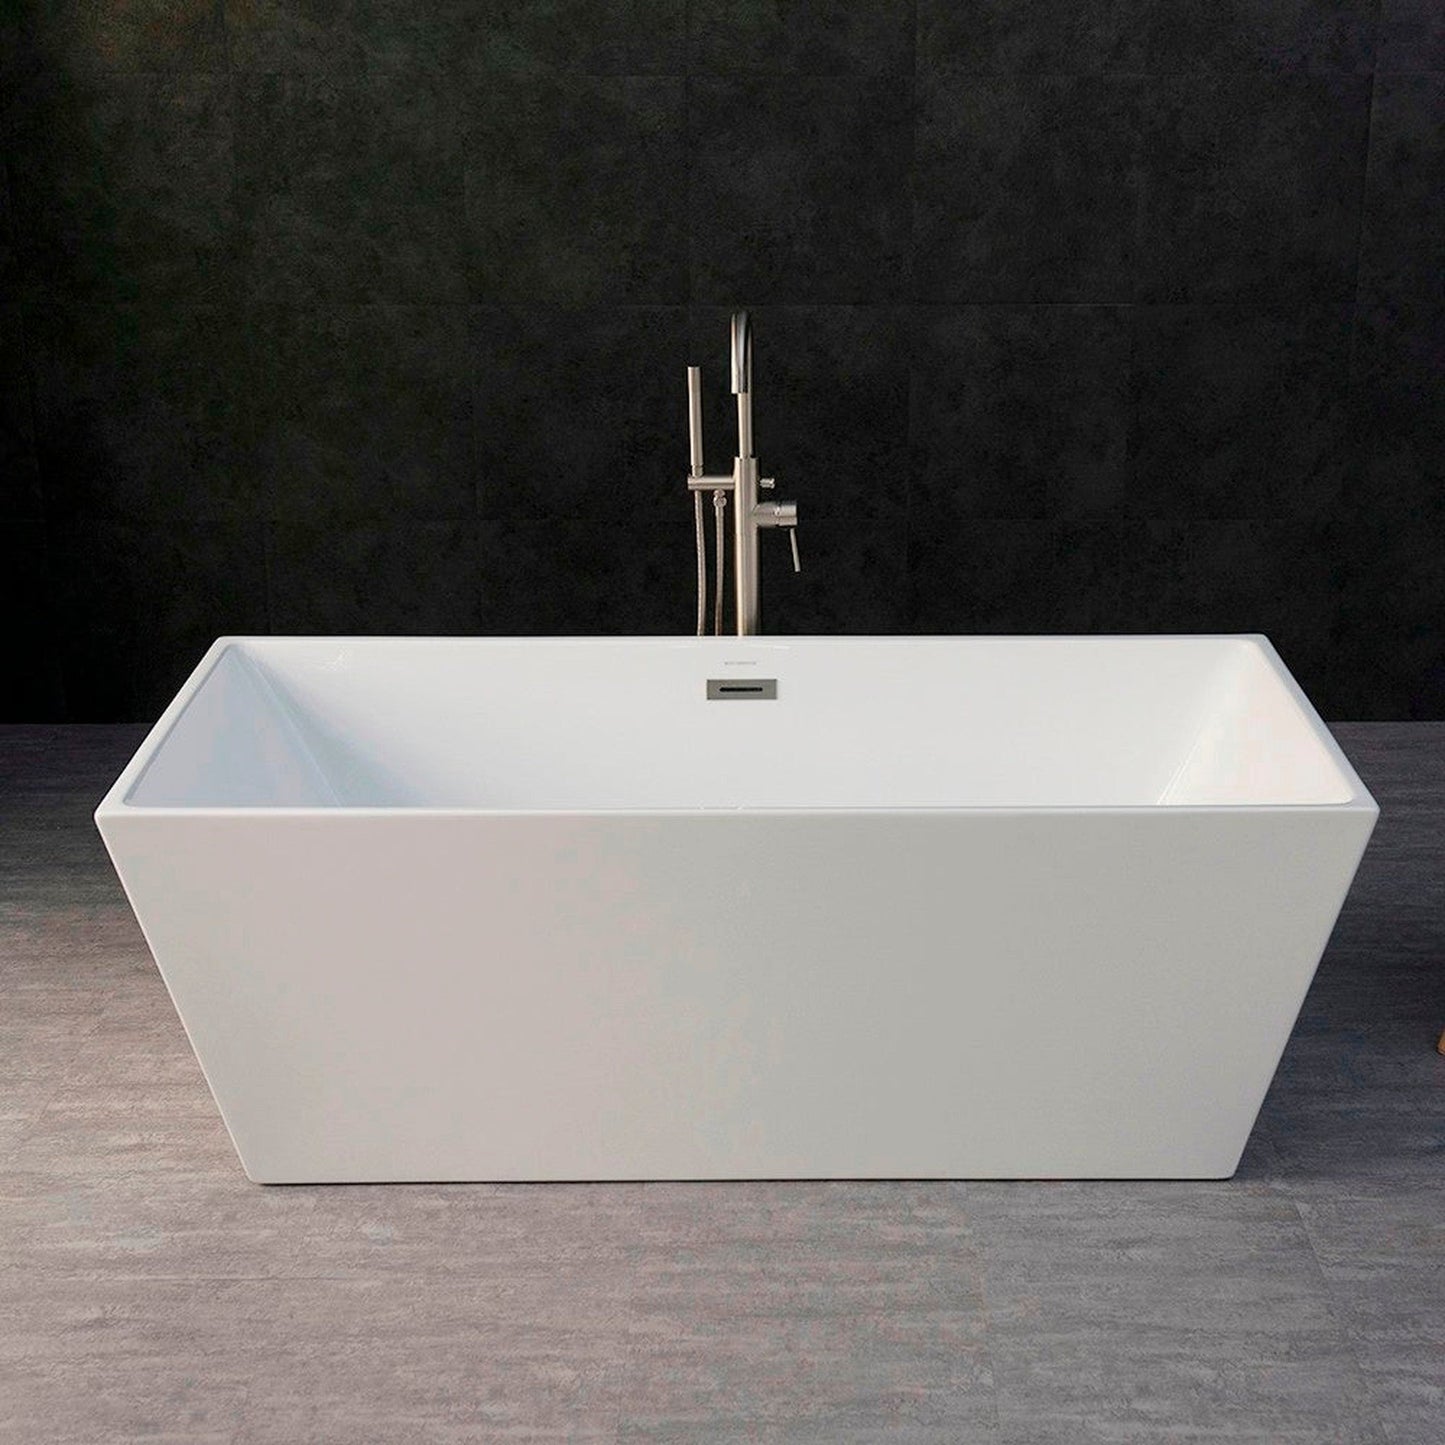 WoodBridge B0003 67" White Acrylic Freestanding Soaking Bathtub With Brushed Nickel Drain, Overflow, F0070BNVT Tub Filler and Caddy Tray